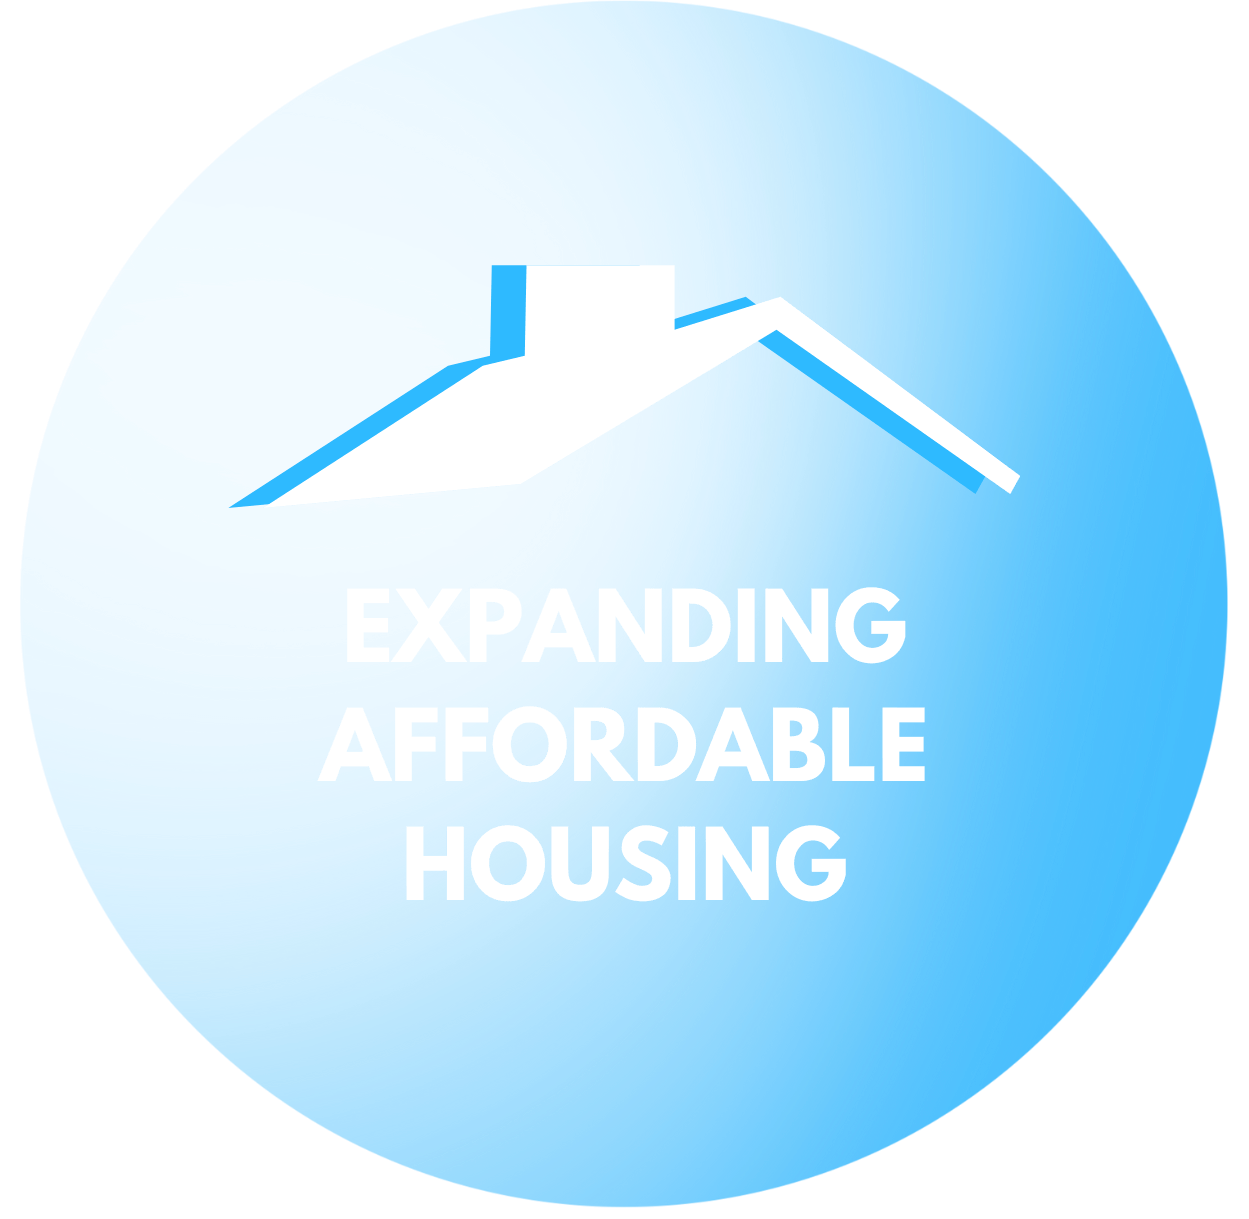 Expanding Affordable Housing.